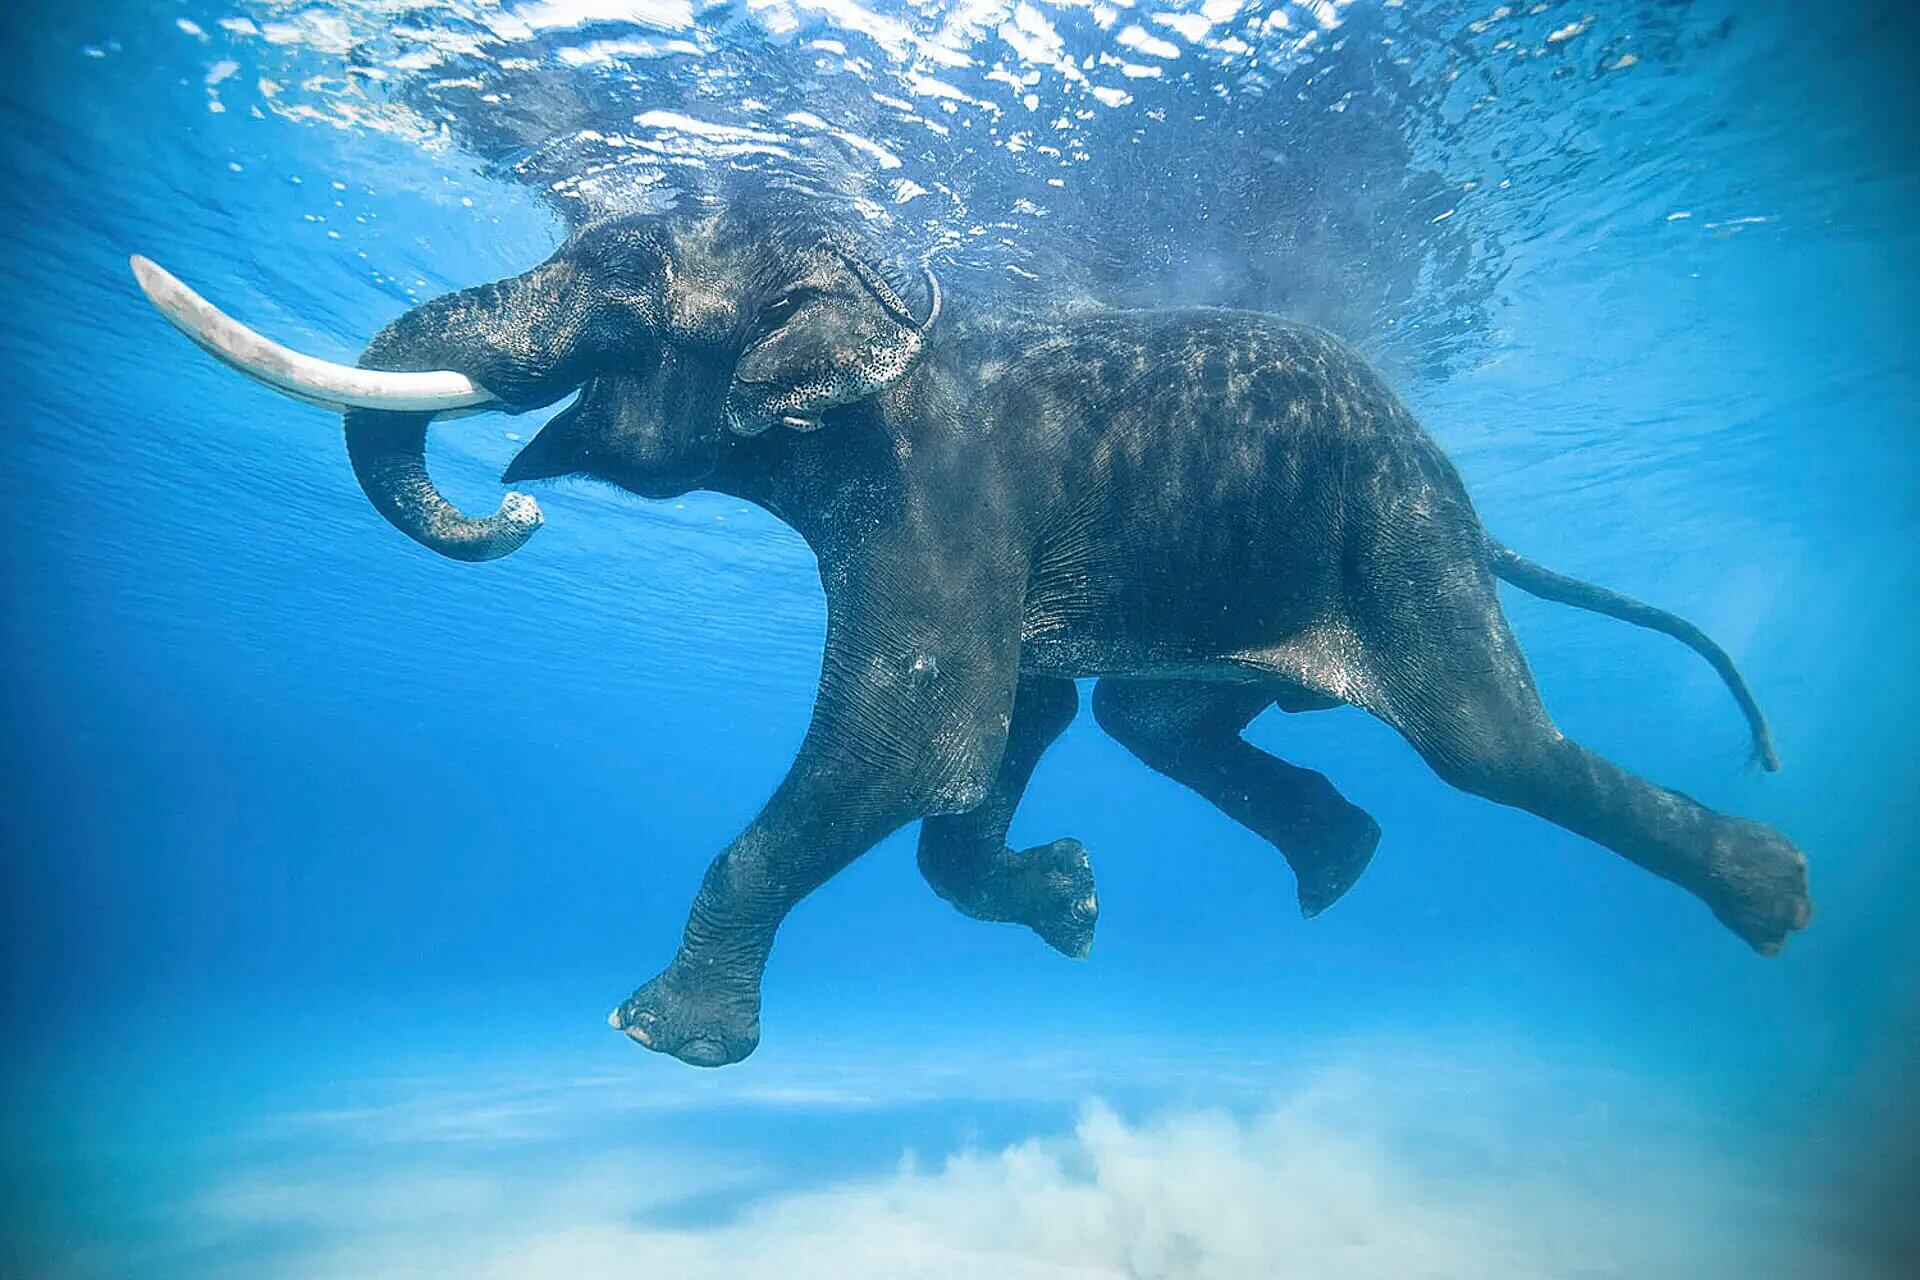 ‘Rajan is a 66-year-old Asian elephant brought to the Andaman Islands for logging in the 1950s. He and 10 other elephants were forced to swim to help bring logged trees to nearby barges and on to the next island. When logging was banned in 2002, Rajan was out of a job. He spent the rest of his days enjoying retirement on one of the islands he helped log. Rajan was the last of the group to survive until his death in 2016. He was truly the last of his kind.’ Jody MacDonald is an award-winning photographer.